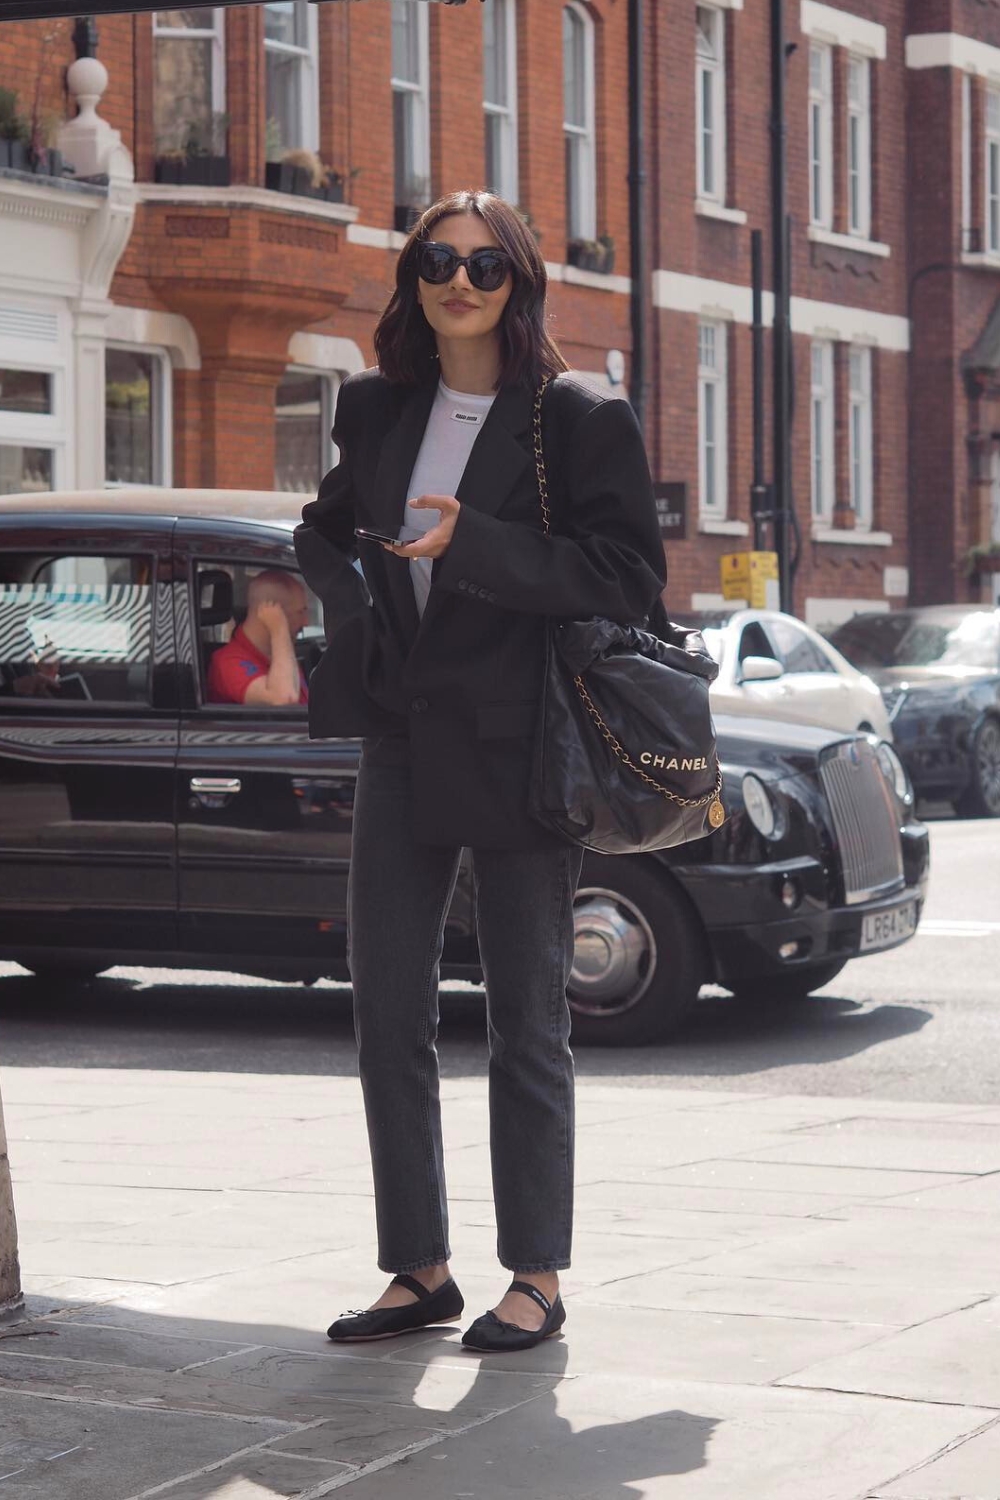 Black Blazer with jeans and Mary Jane outfit for work